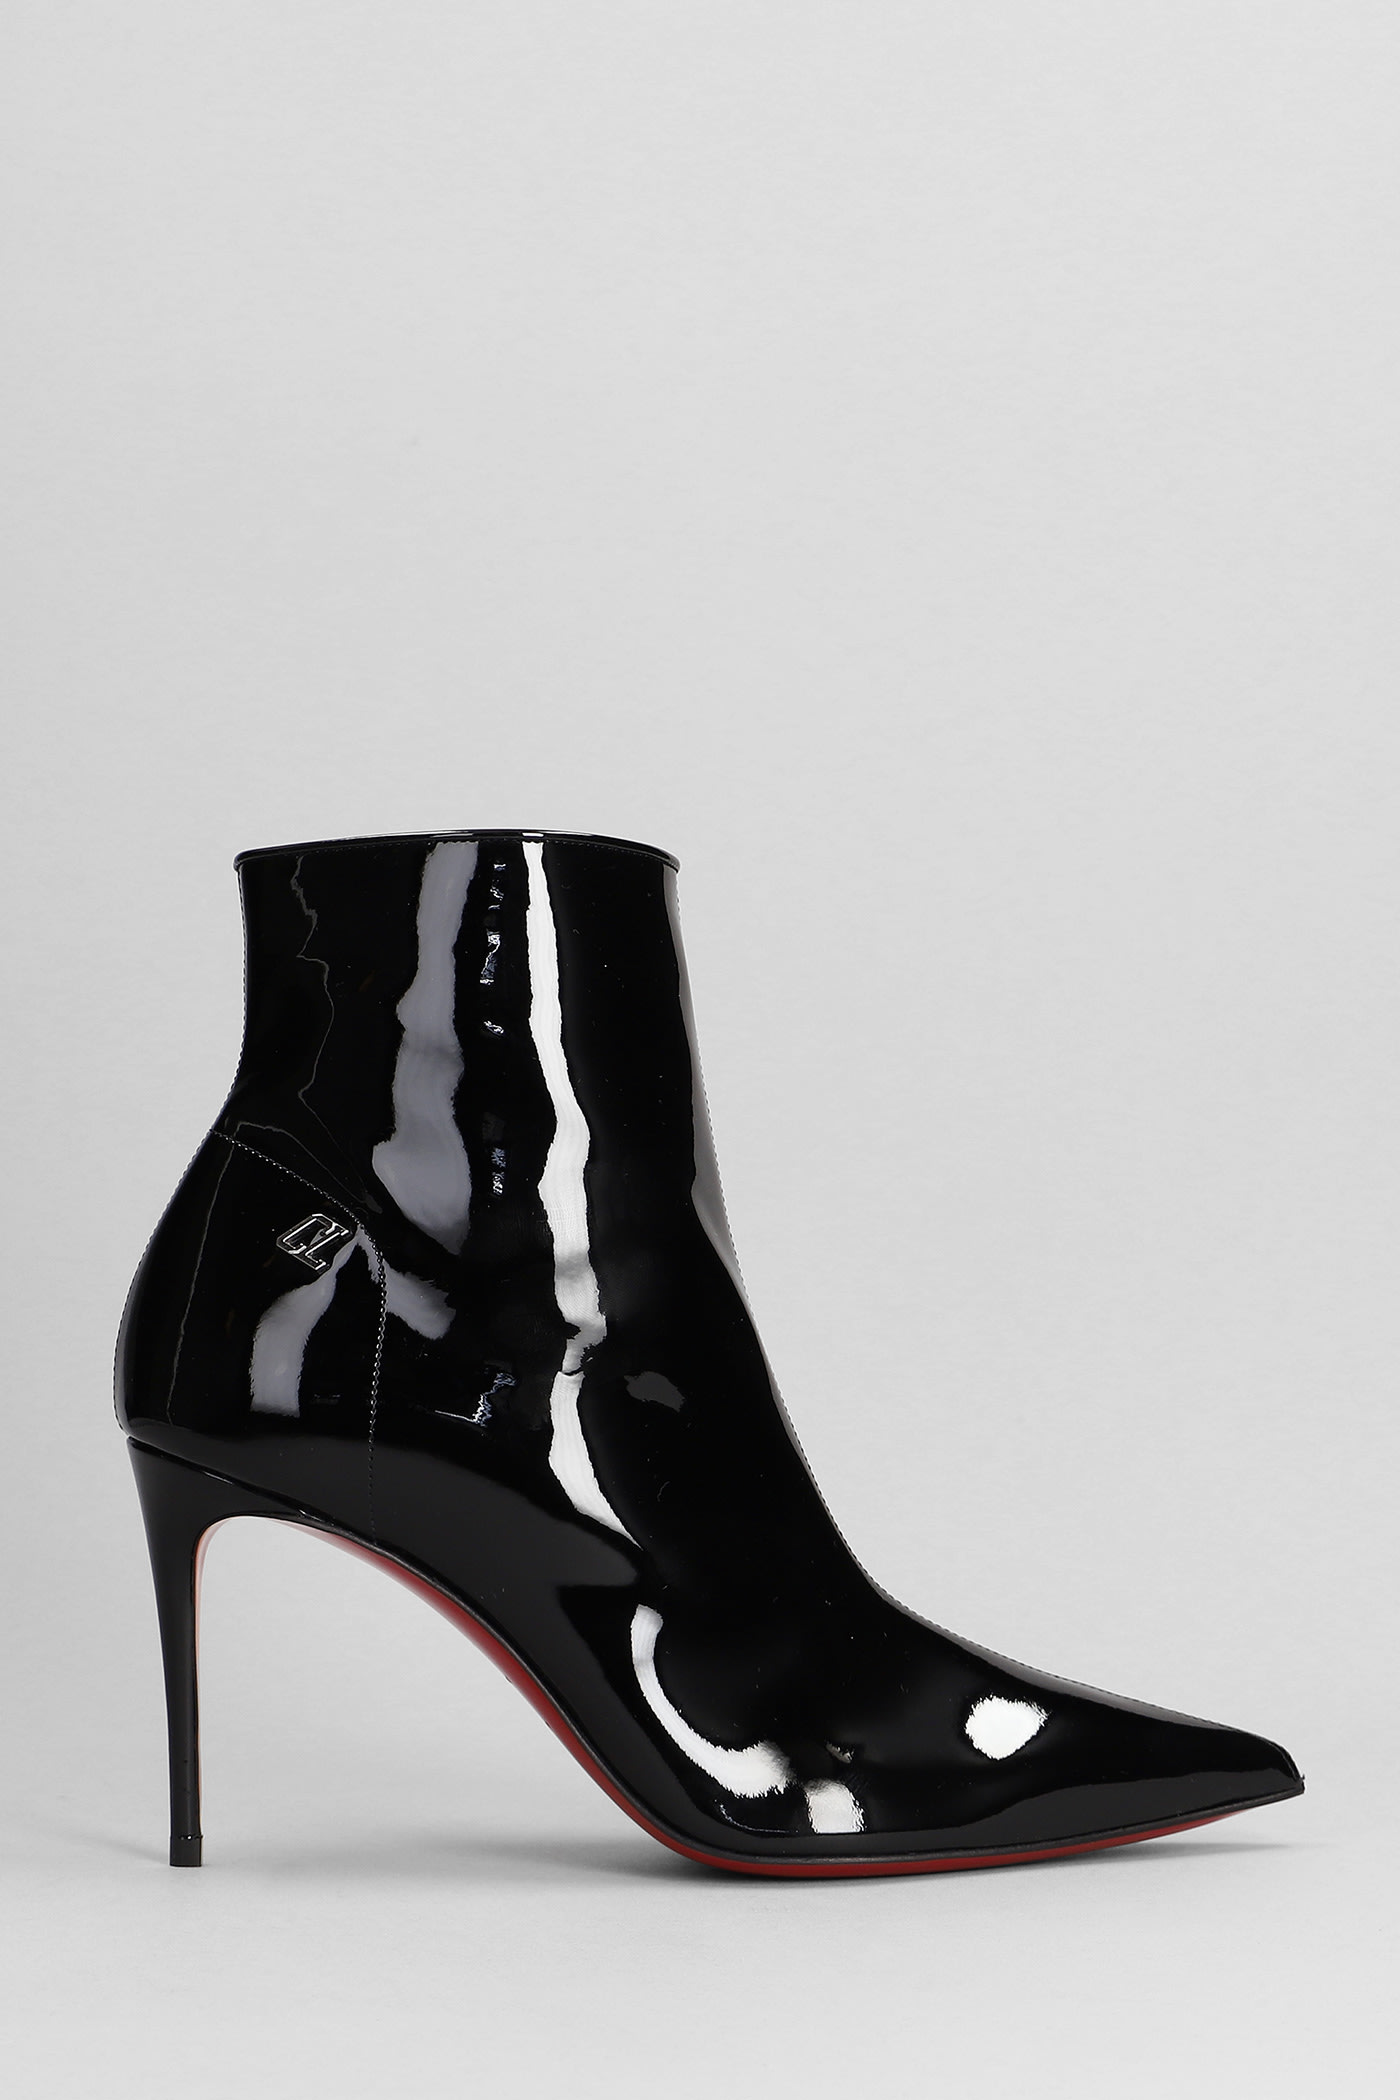 Sporty Kate Booty High Heels Ankle Boots In Black Patent Leather